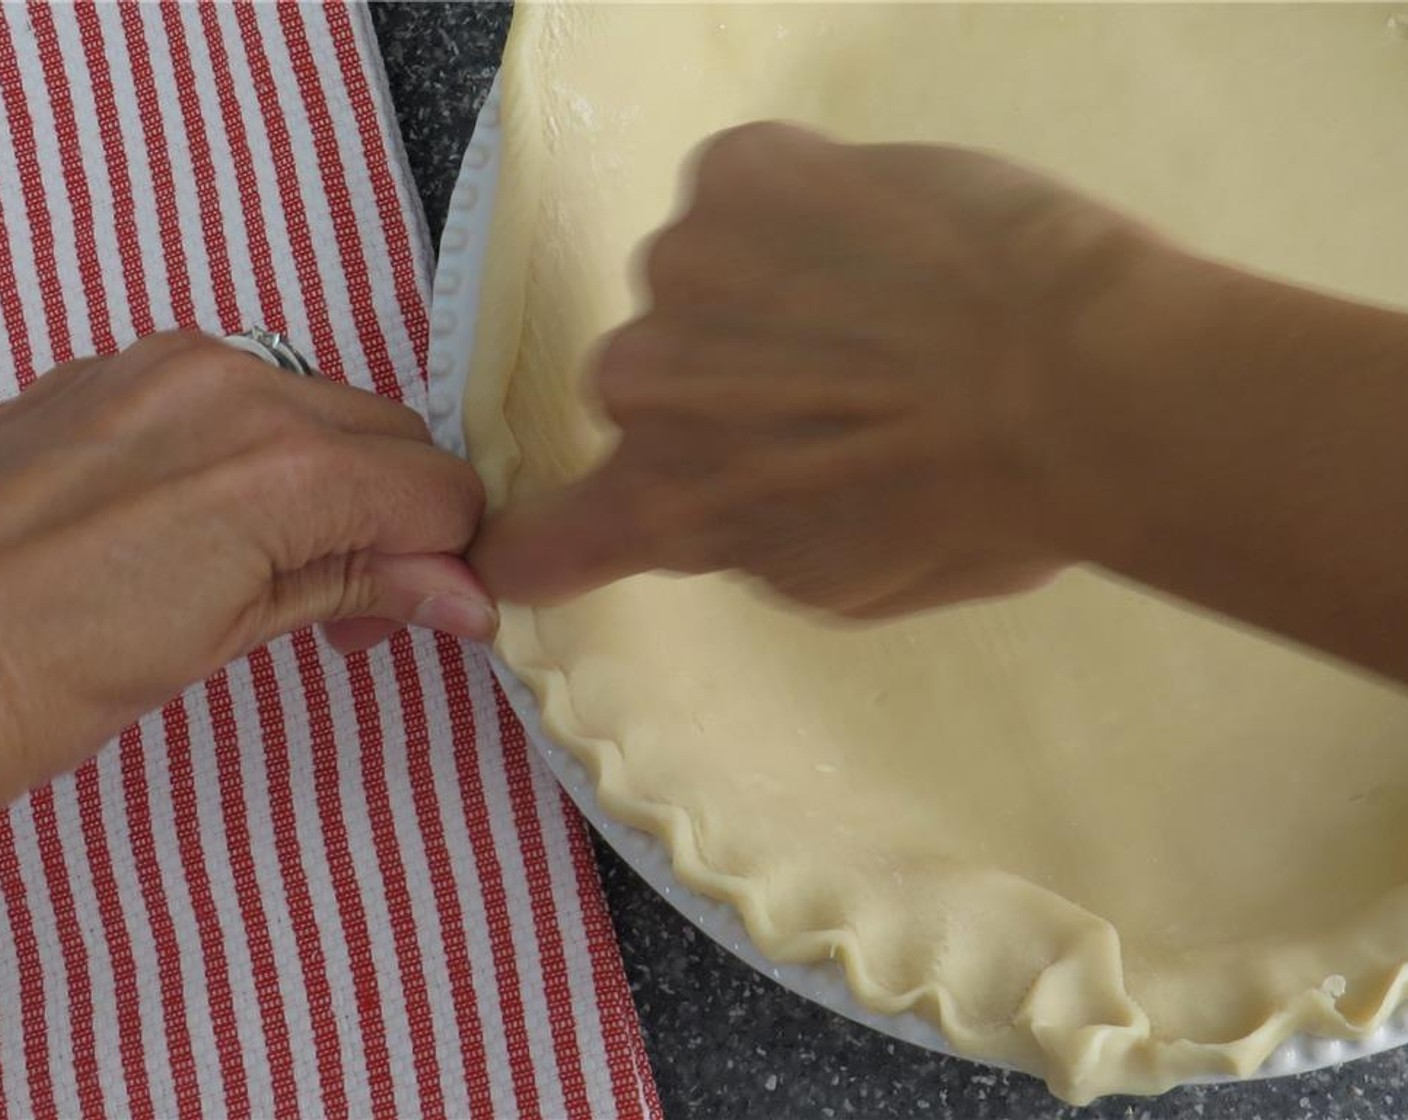 step 2 Place the 9-inch Pie Crust (1) into a glass or ceramic pie plate. Press bottom and sides into plate, and finish the edges of the crust by pressing the tines of a fork against the rim of the crust. Refrigerate crust until oven is preheated.